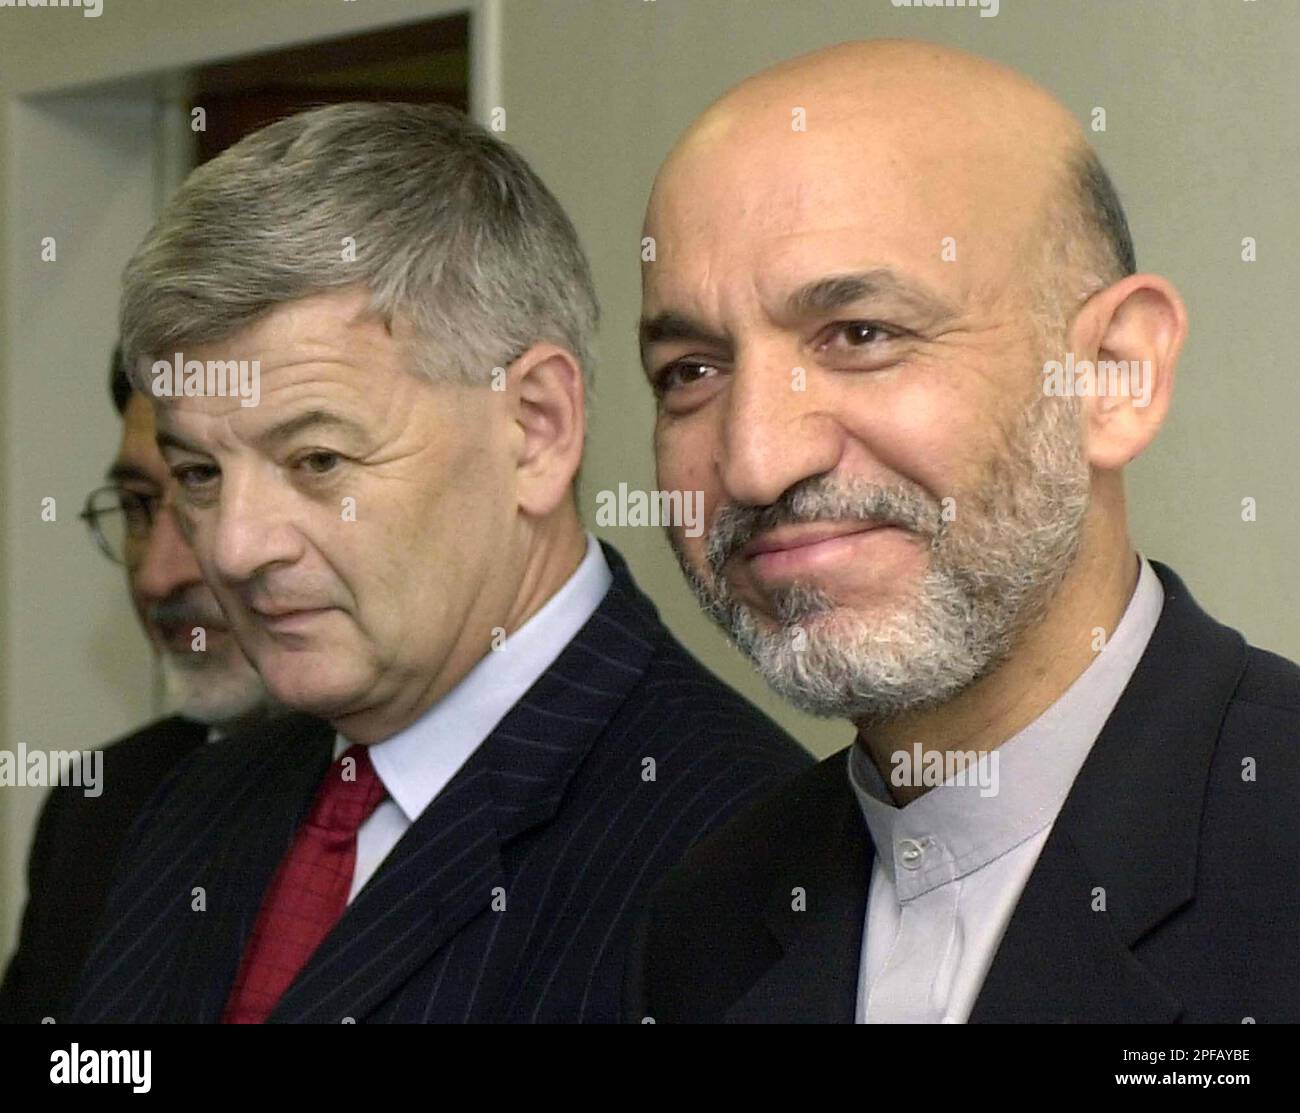 Afghan President Hamid Karzai, right, smiles after he was welcomed by German Foreign Minister Joschka Fischer, left, after he arrived at the U.S. Rhein Main Air Base, at the southern end of Frankfurt international airport, Germany, Sunday, Sept. 8, 2002. In his first trip since an attempt on his life three days ago, Karzai stopped over in Germany on his way to the United States where he will attend the U.N. General Assembly debate and ceremonies marking the anniversary of the Sept. 11 terrorist attacks. (AP Photo/Pool/Oliver Berg) Stockfoto